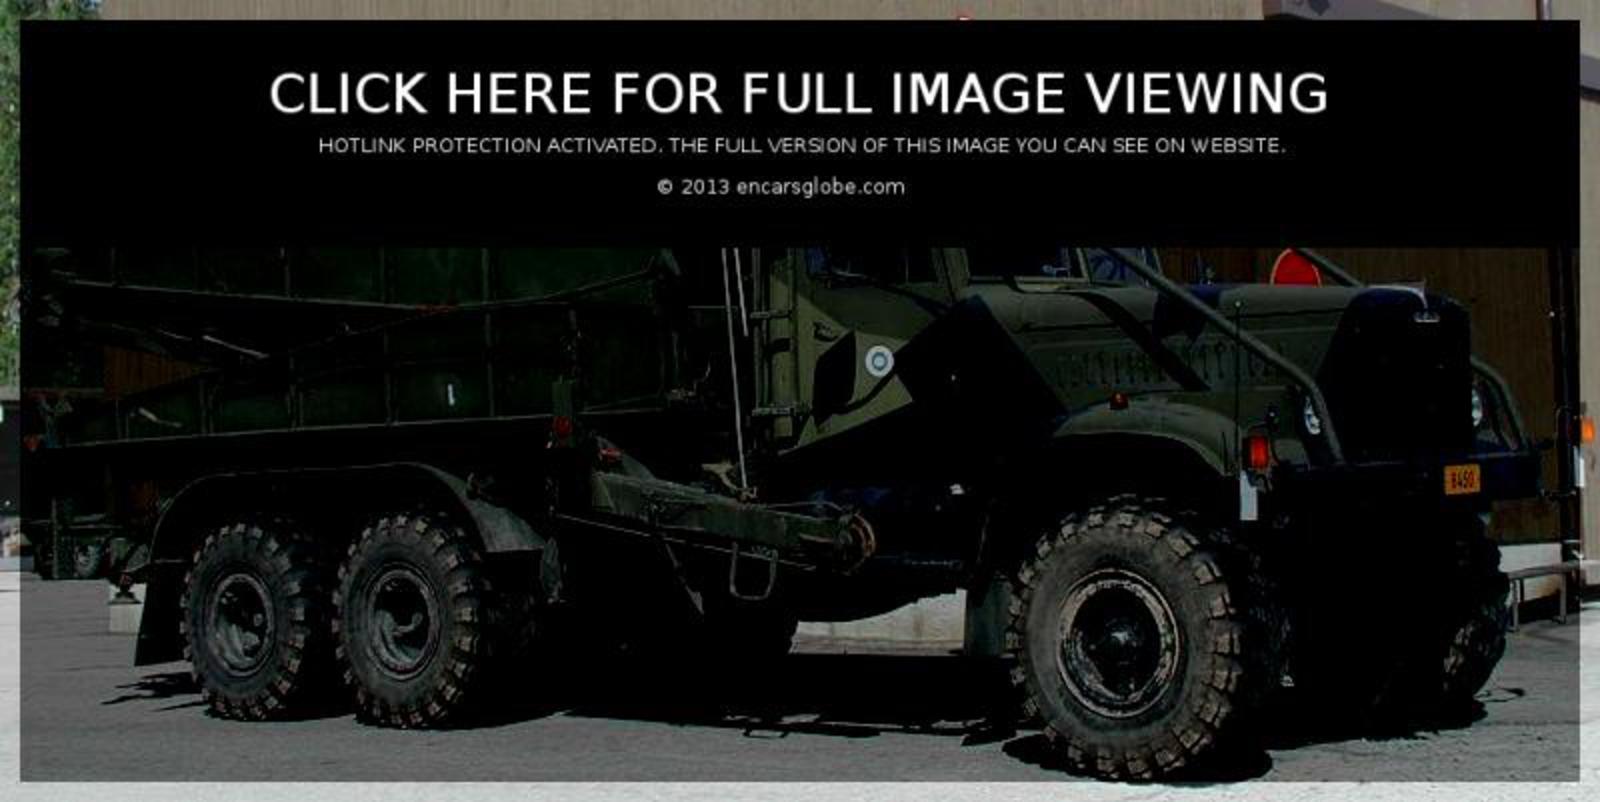 KrAZ 255 B1: Photo gallery, complete information about model ...